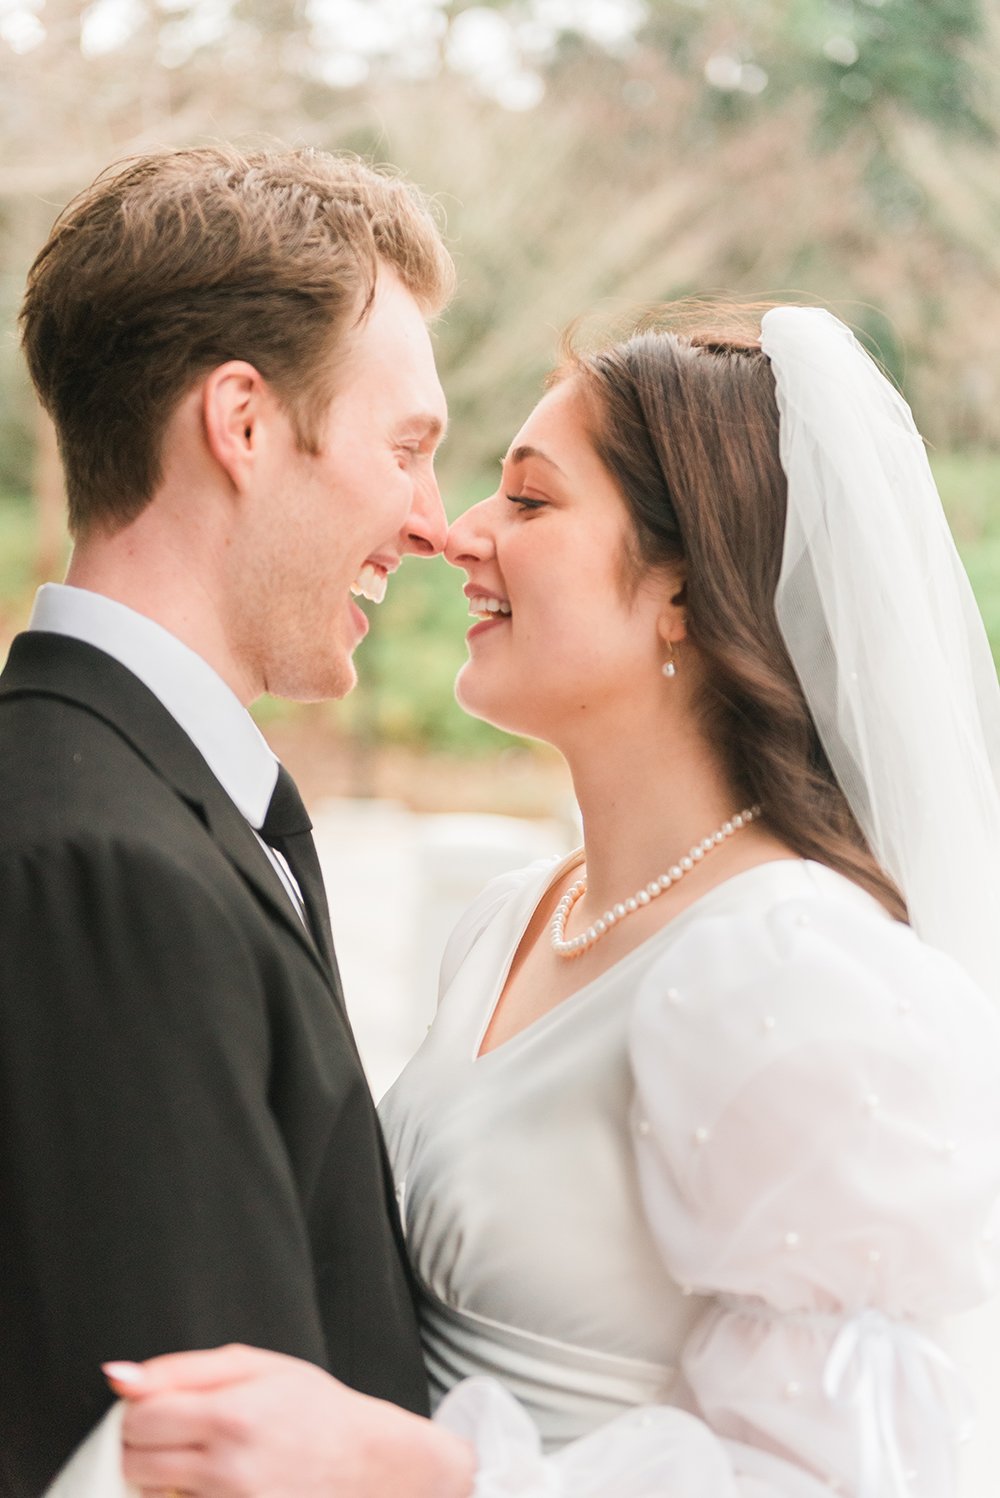  A bride and groom touch noses as they smile at each other during their wedding photos taken by Atlanta-based photographer, Jacquie Erickson. Professional wedding photographer wedding pictures #weddingphotographer #ldsweddings #atlantatemple #jacquie